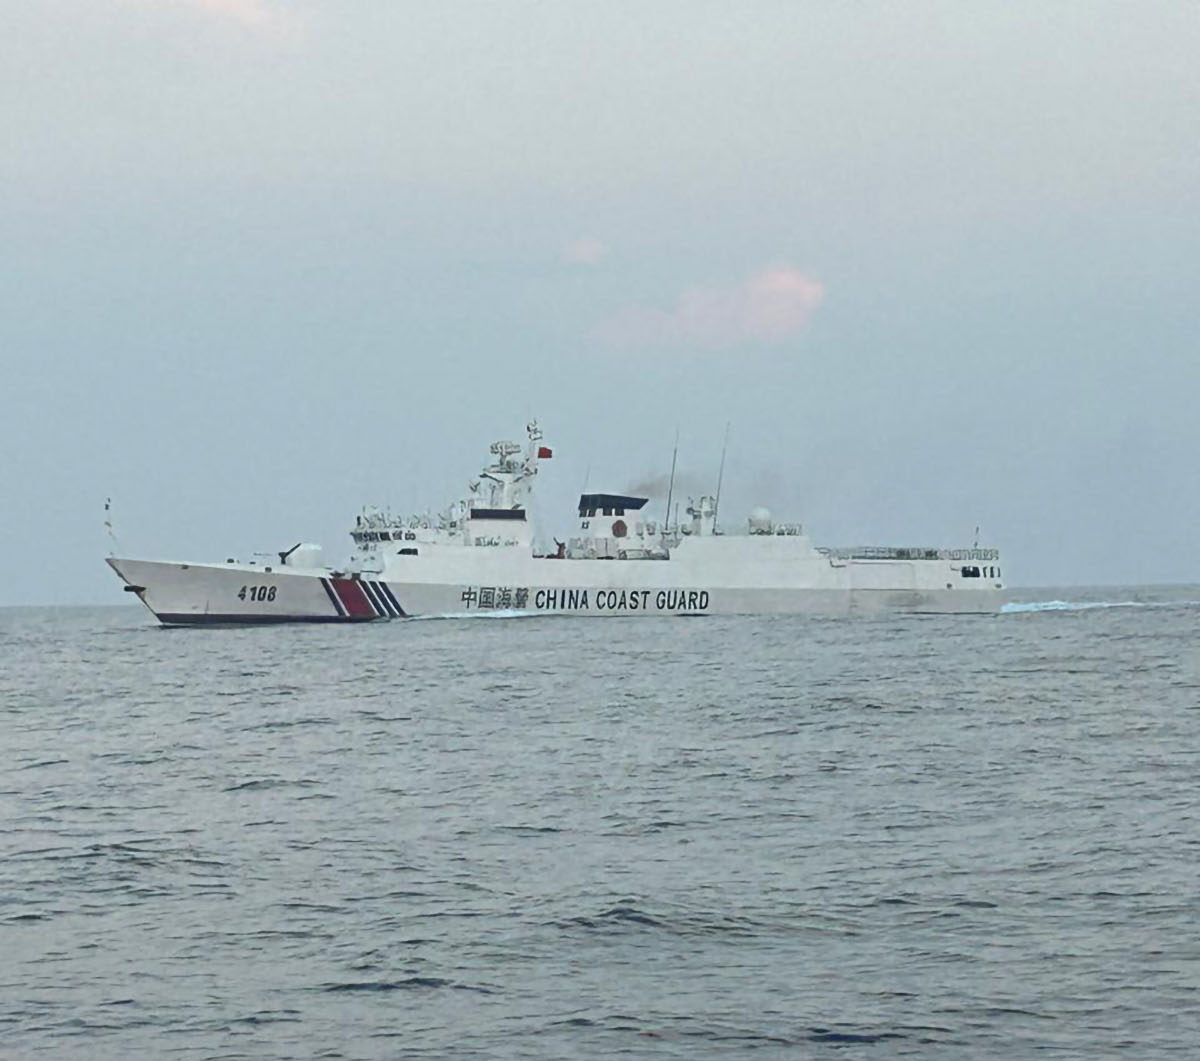 Chinese Coast Guard ships seen near mother boat of Scarborough convoy